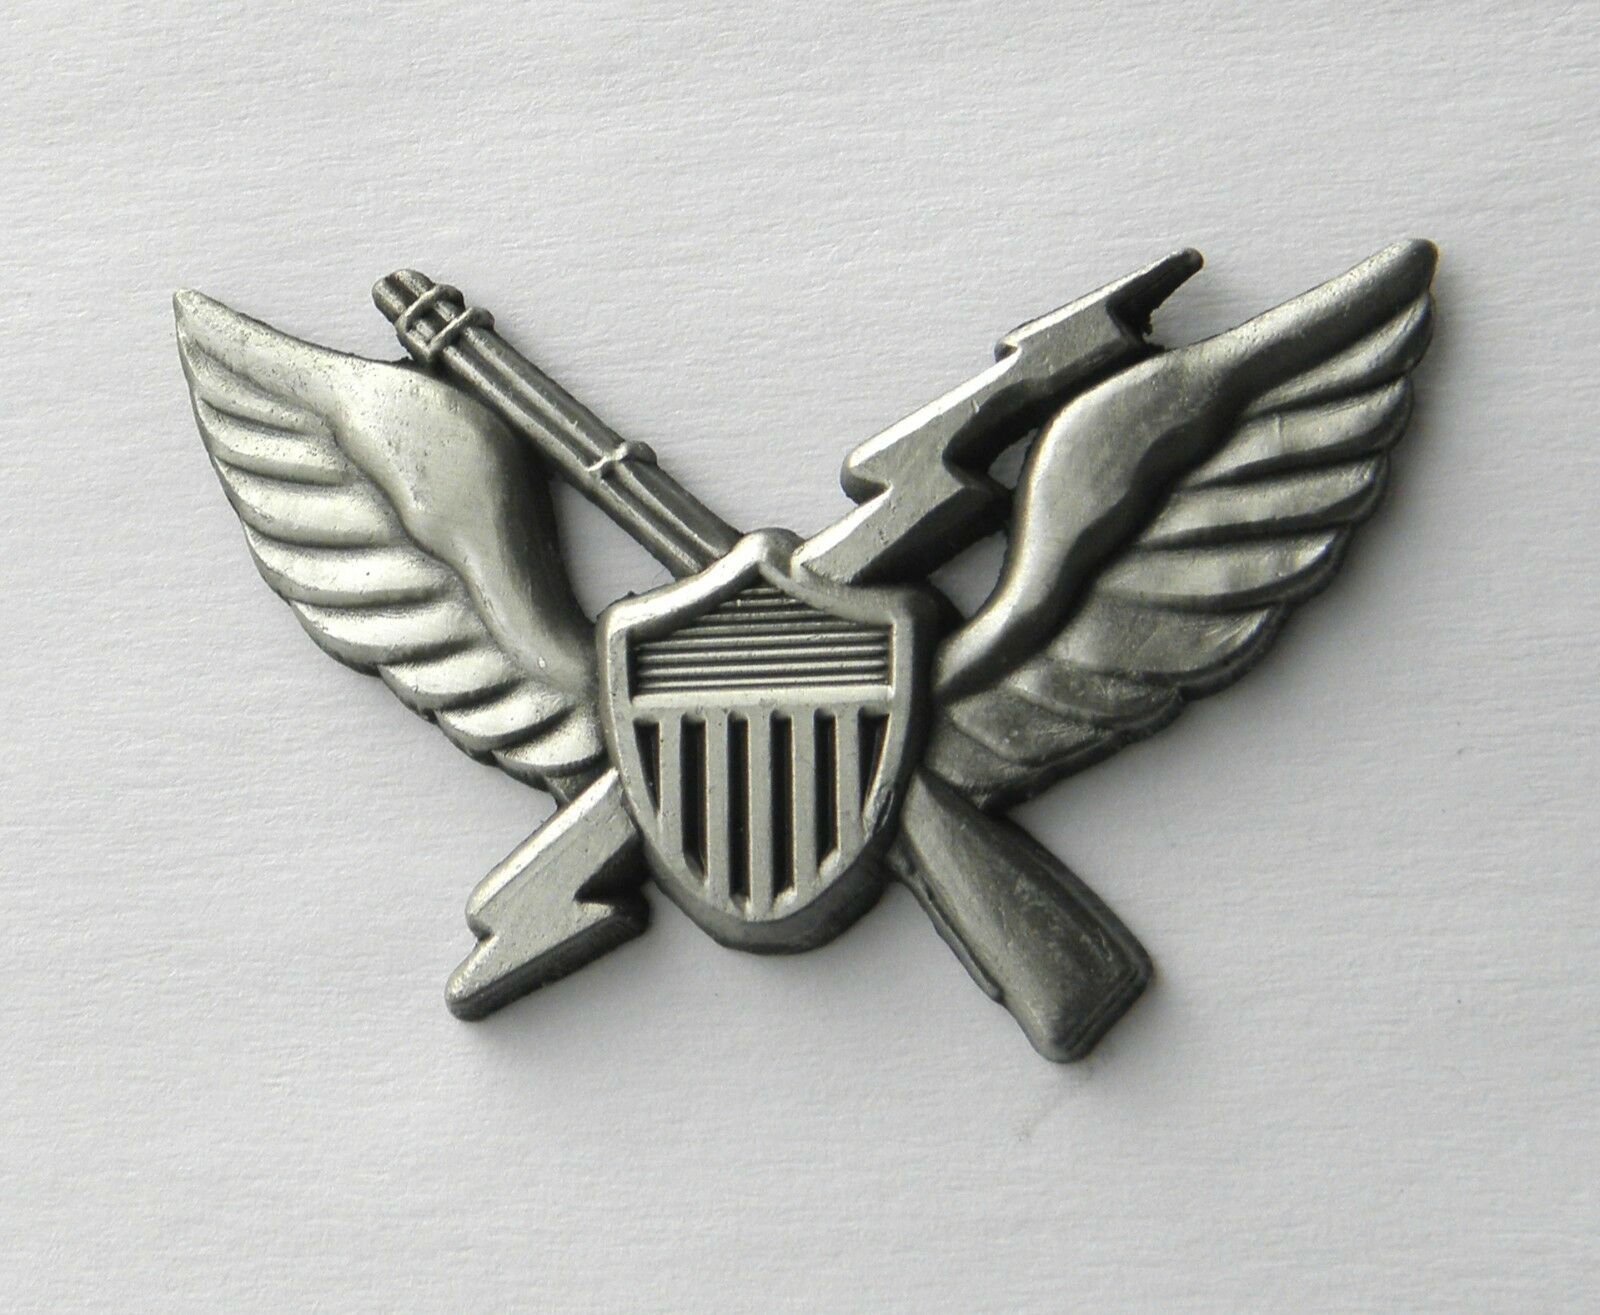 US ARMY 11TH AIRBORNE DIVISION AIR ASSAULT LAPEL PIN BADGE 7/8 INCH 